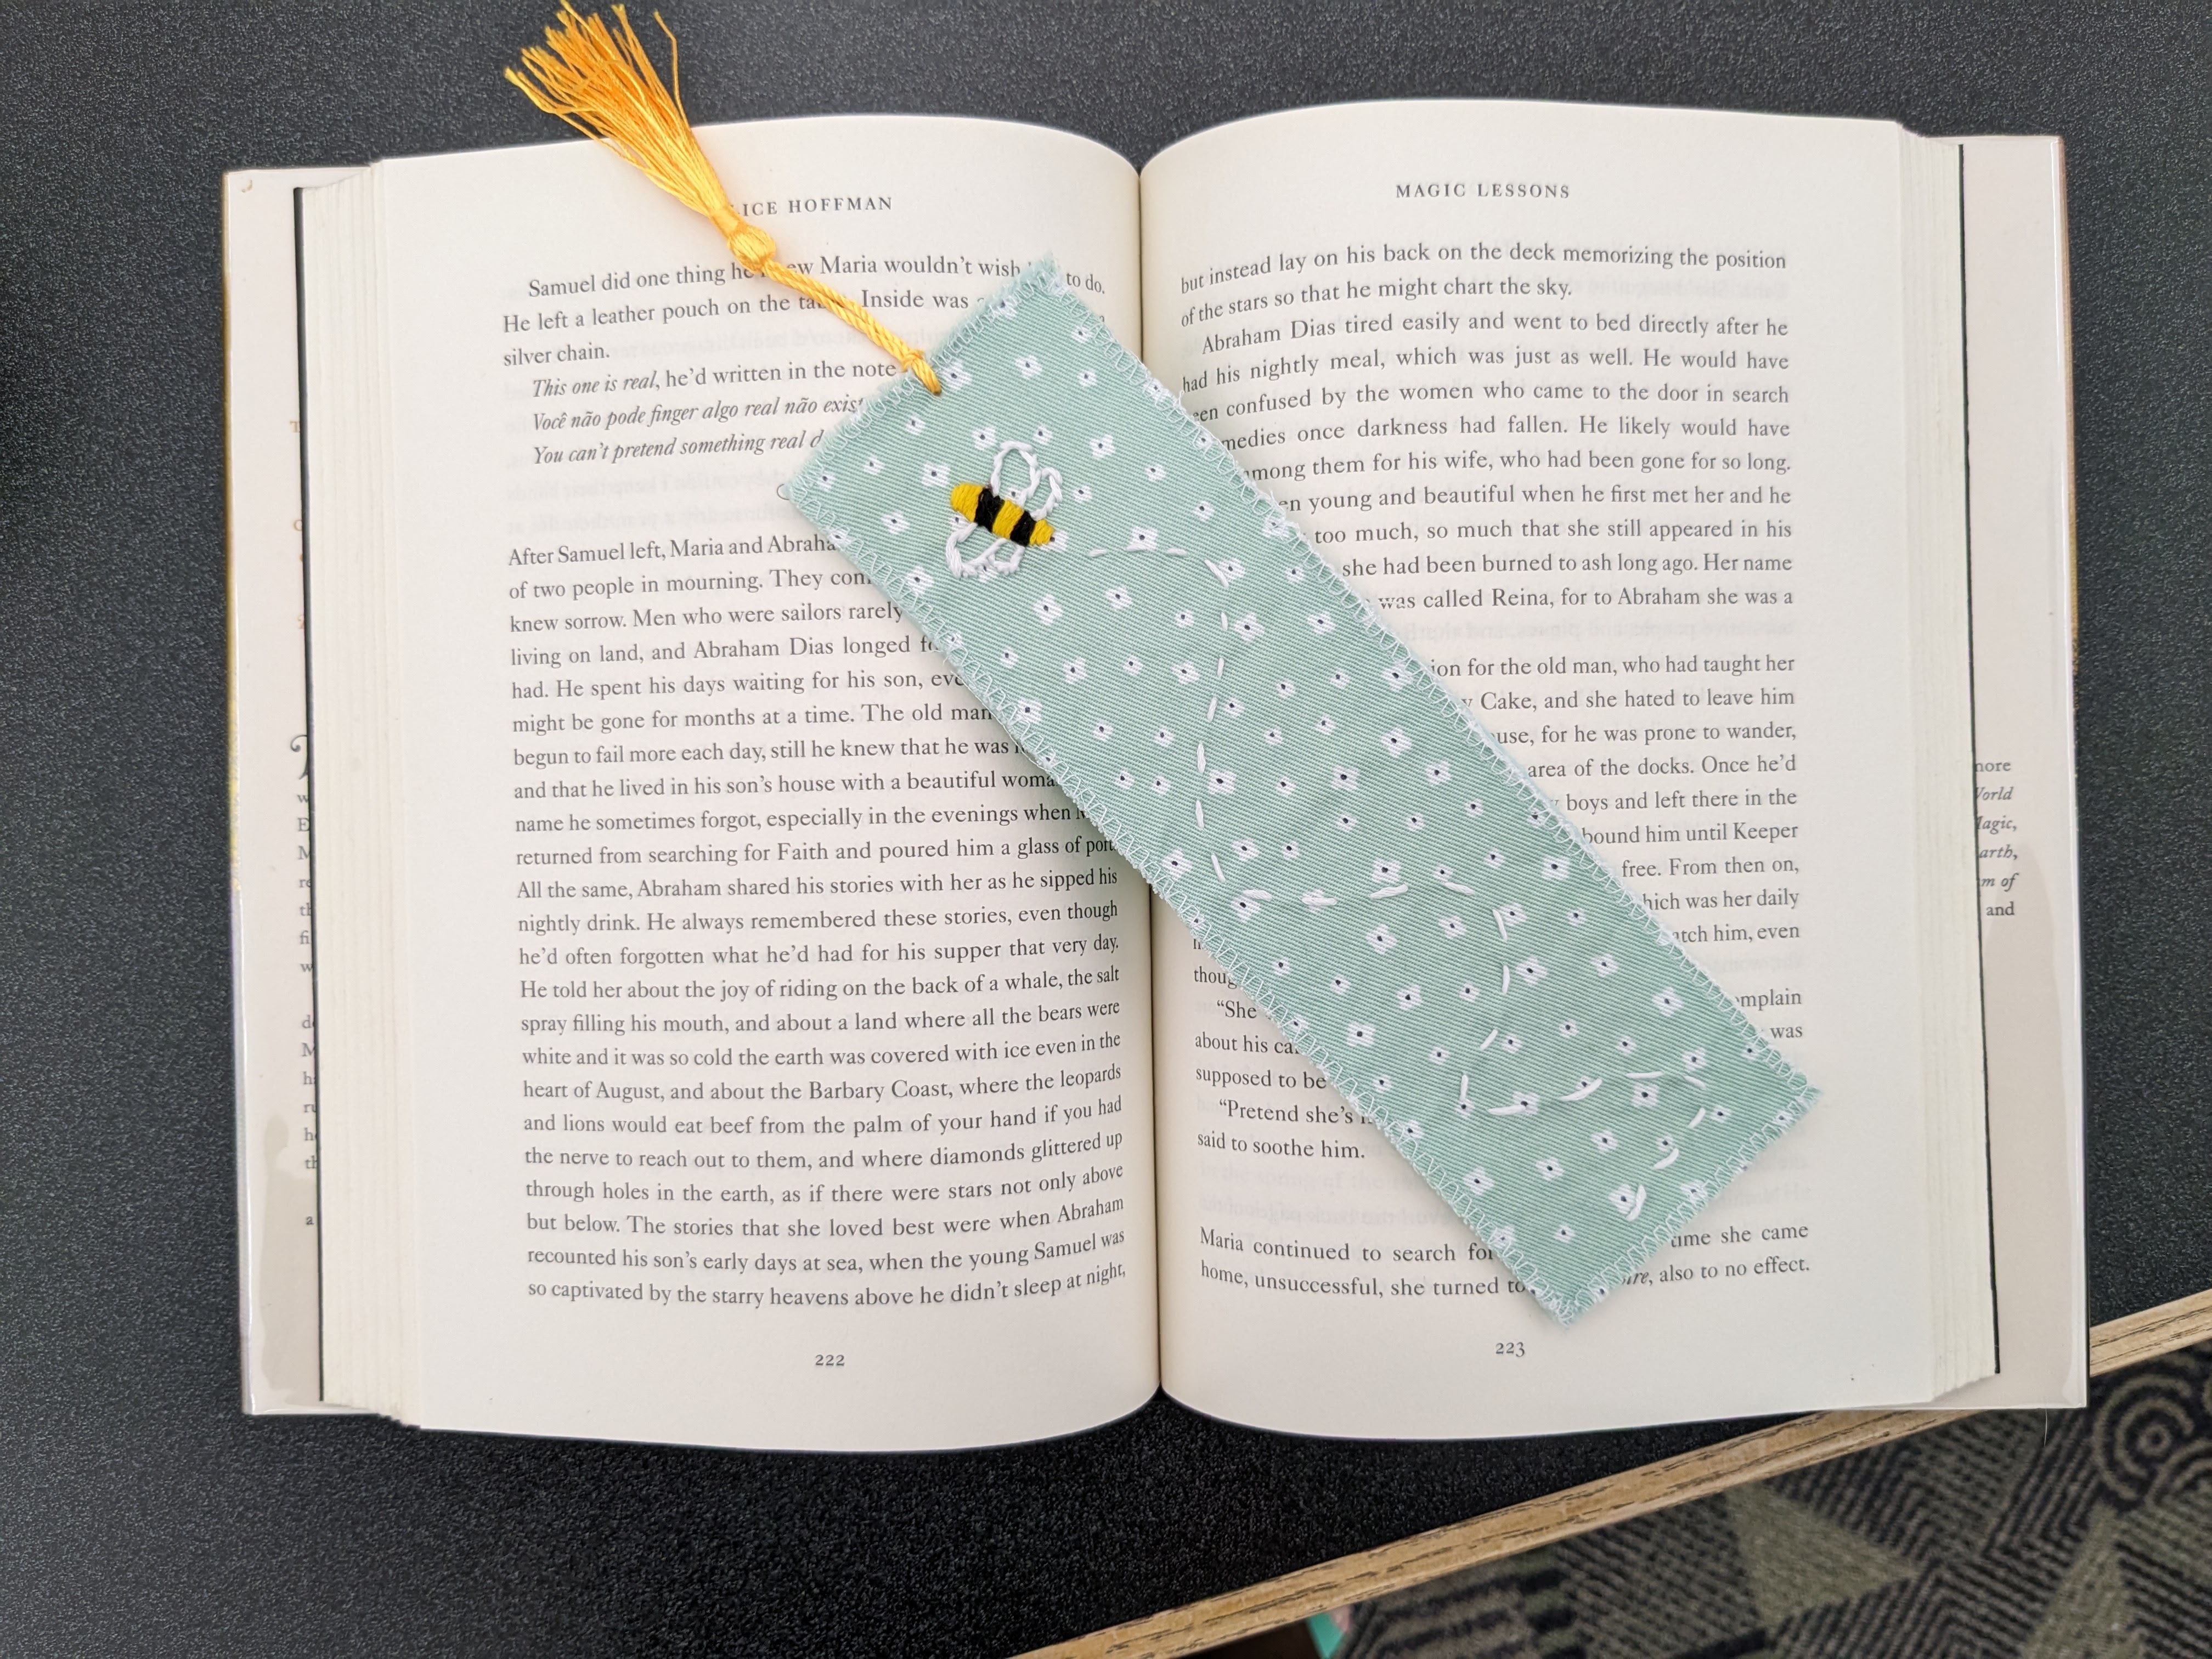 Embroidered bee bookmark with tassel on green flower fabric resting on open book